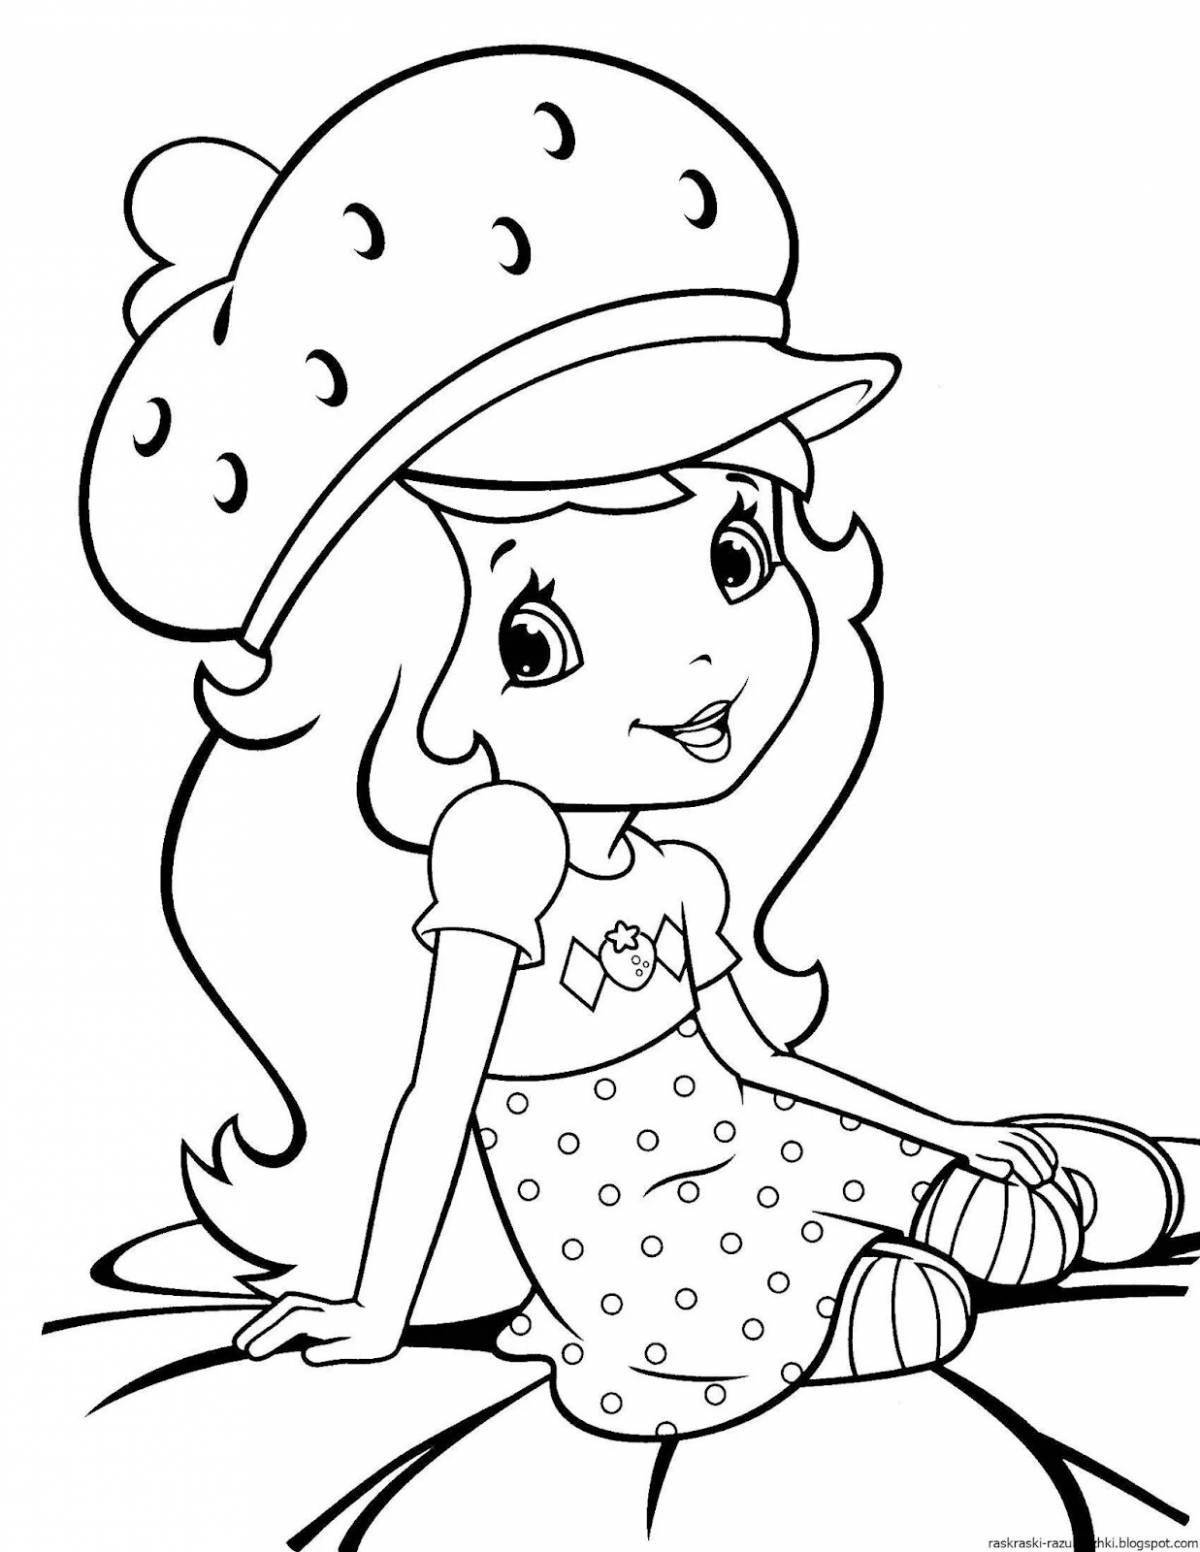 Color-frenzy coloring for girls 4 5